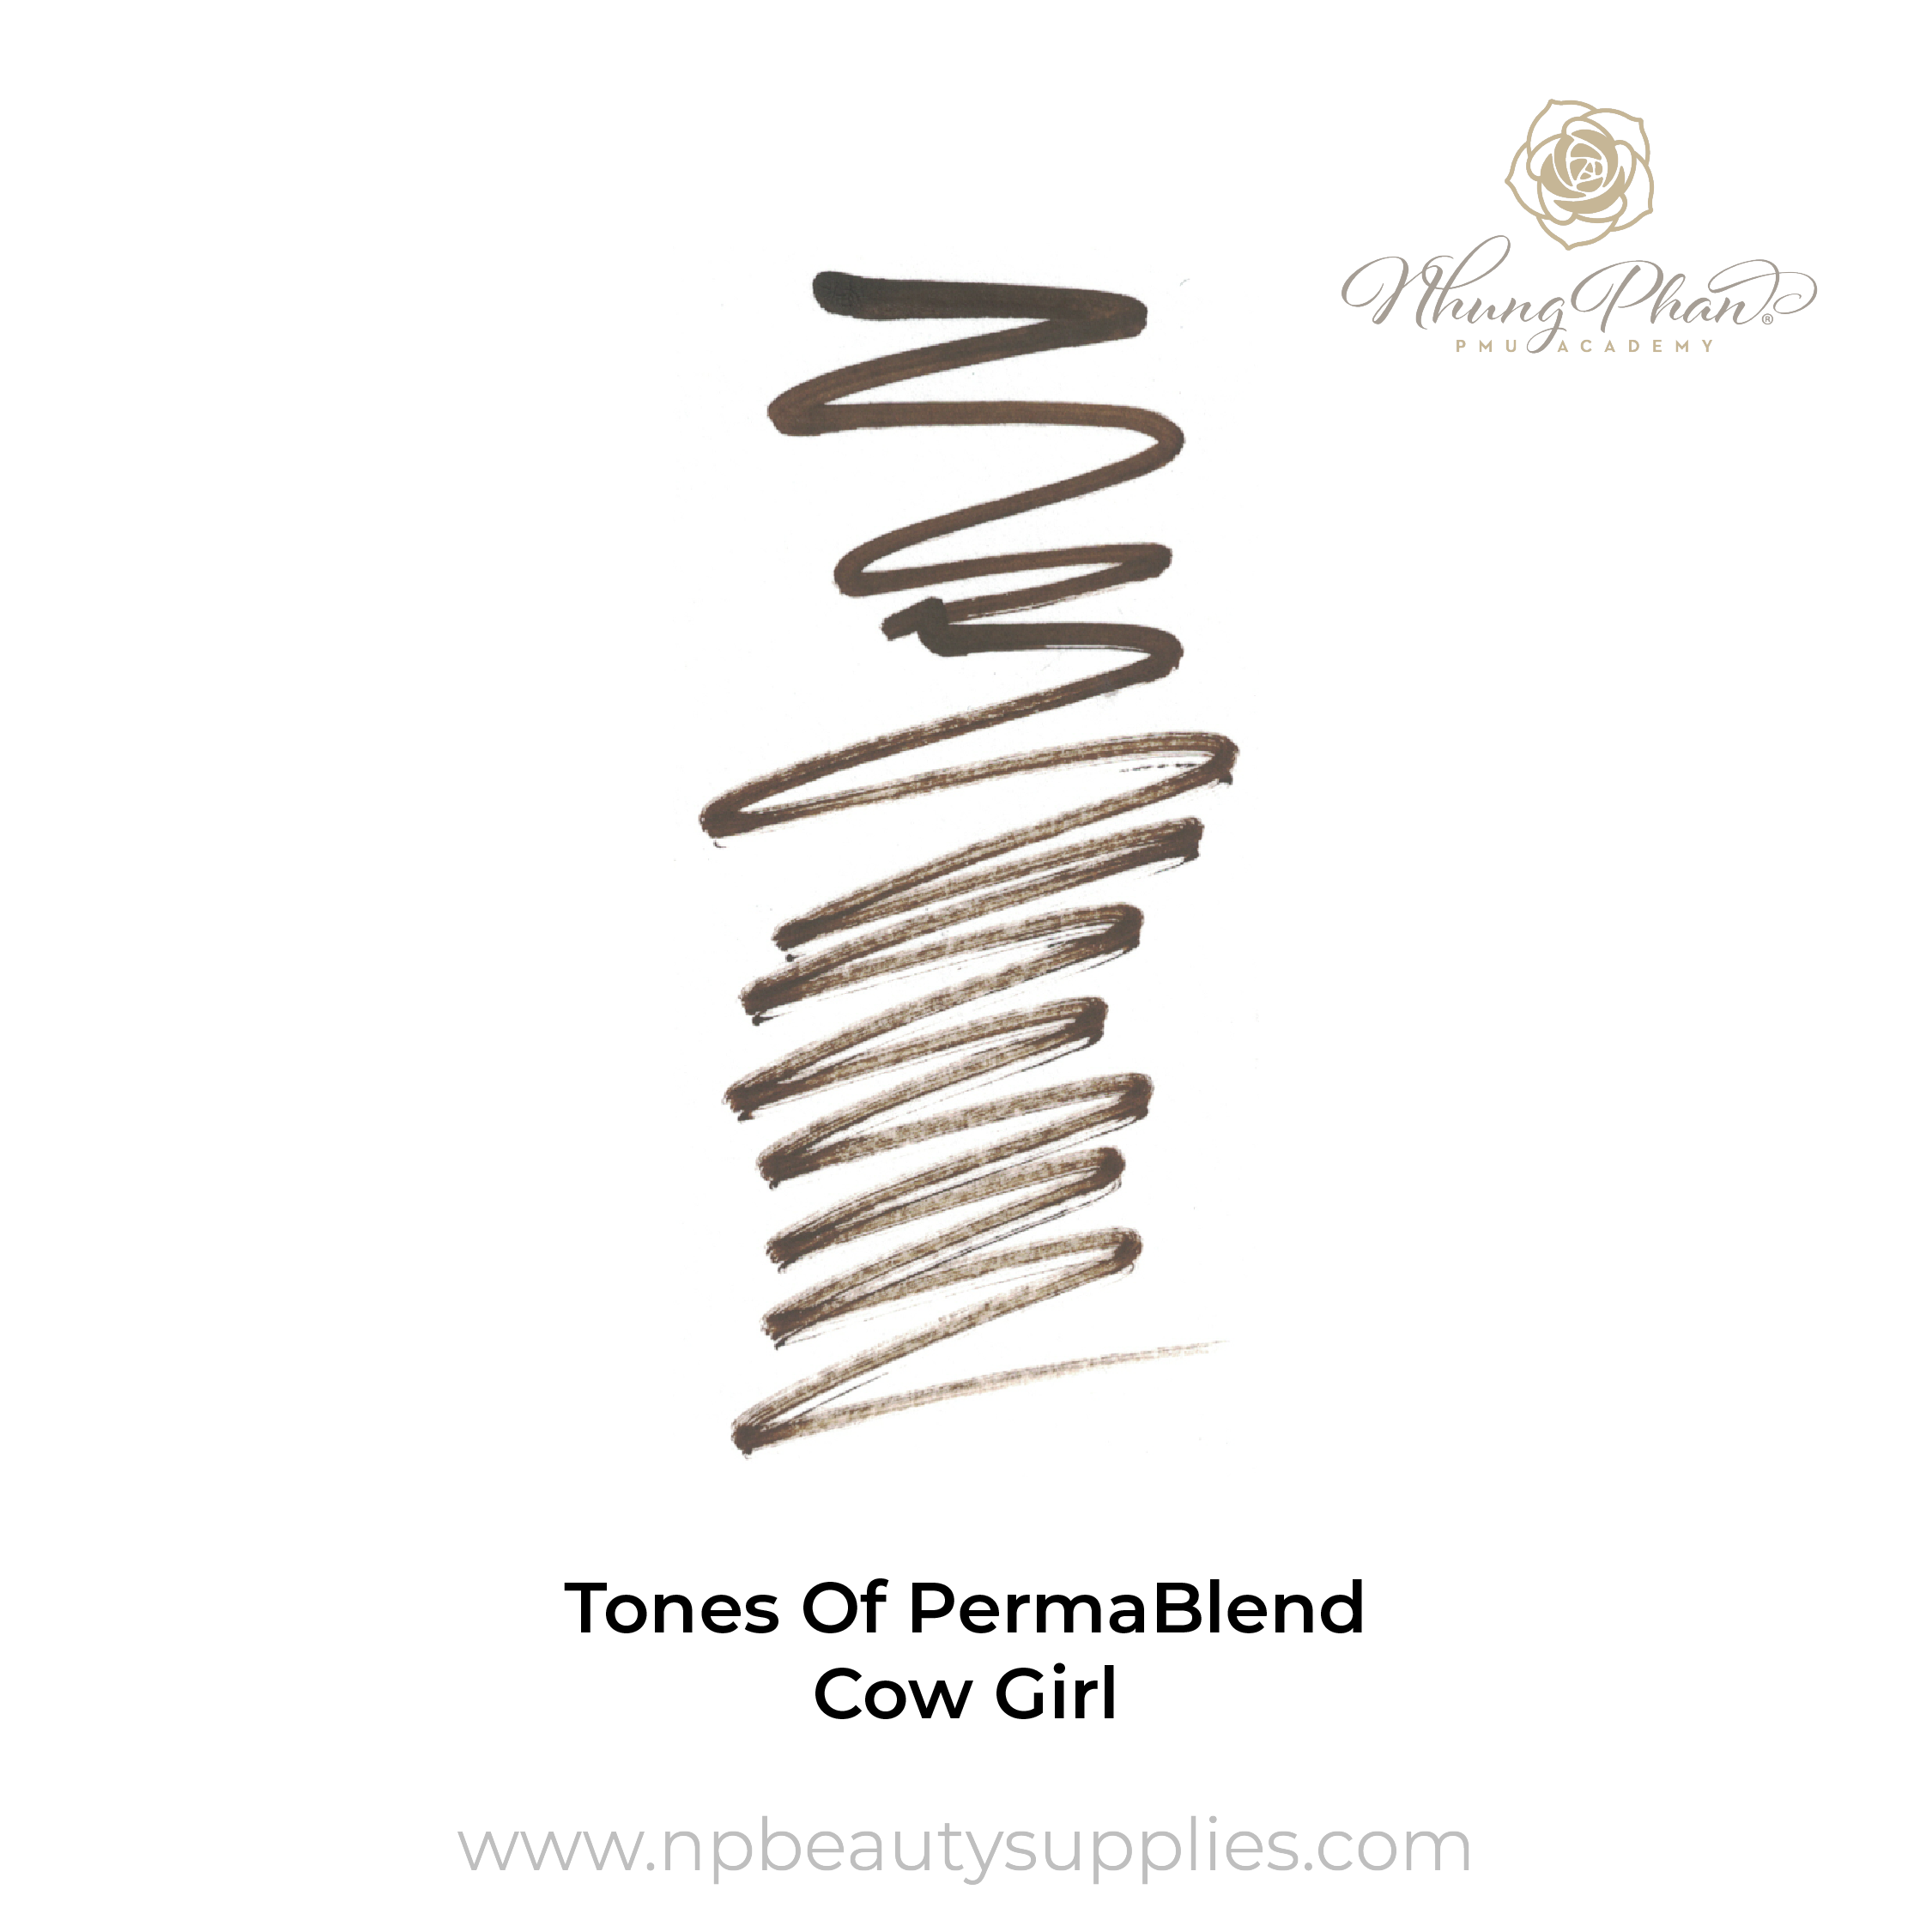 Tones Of PermaBlend - Cow Girl